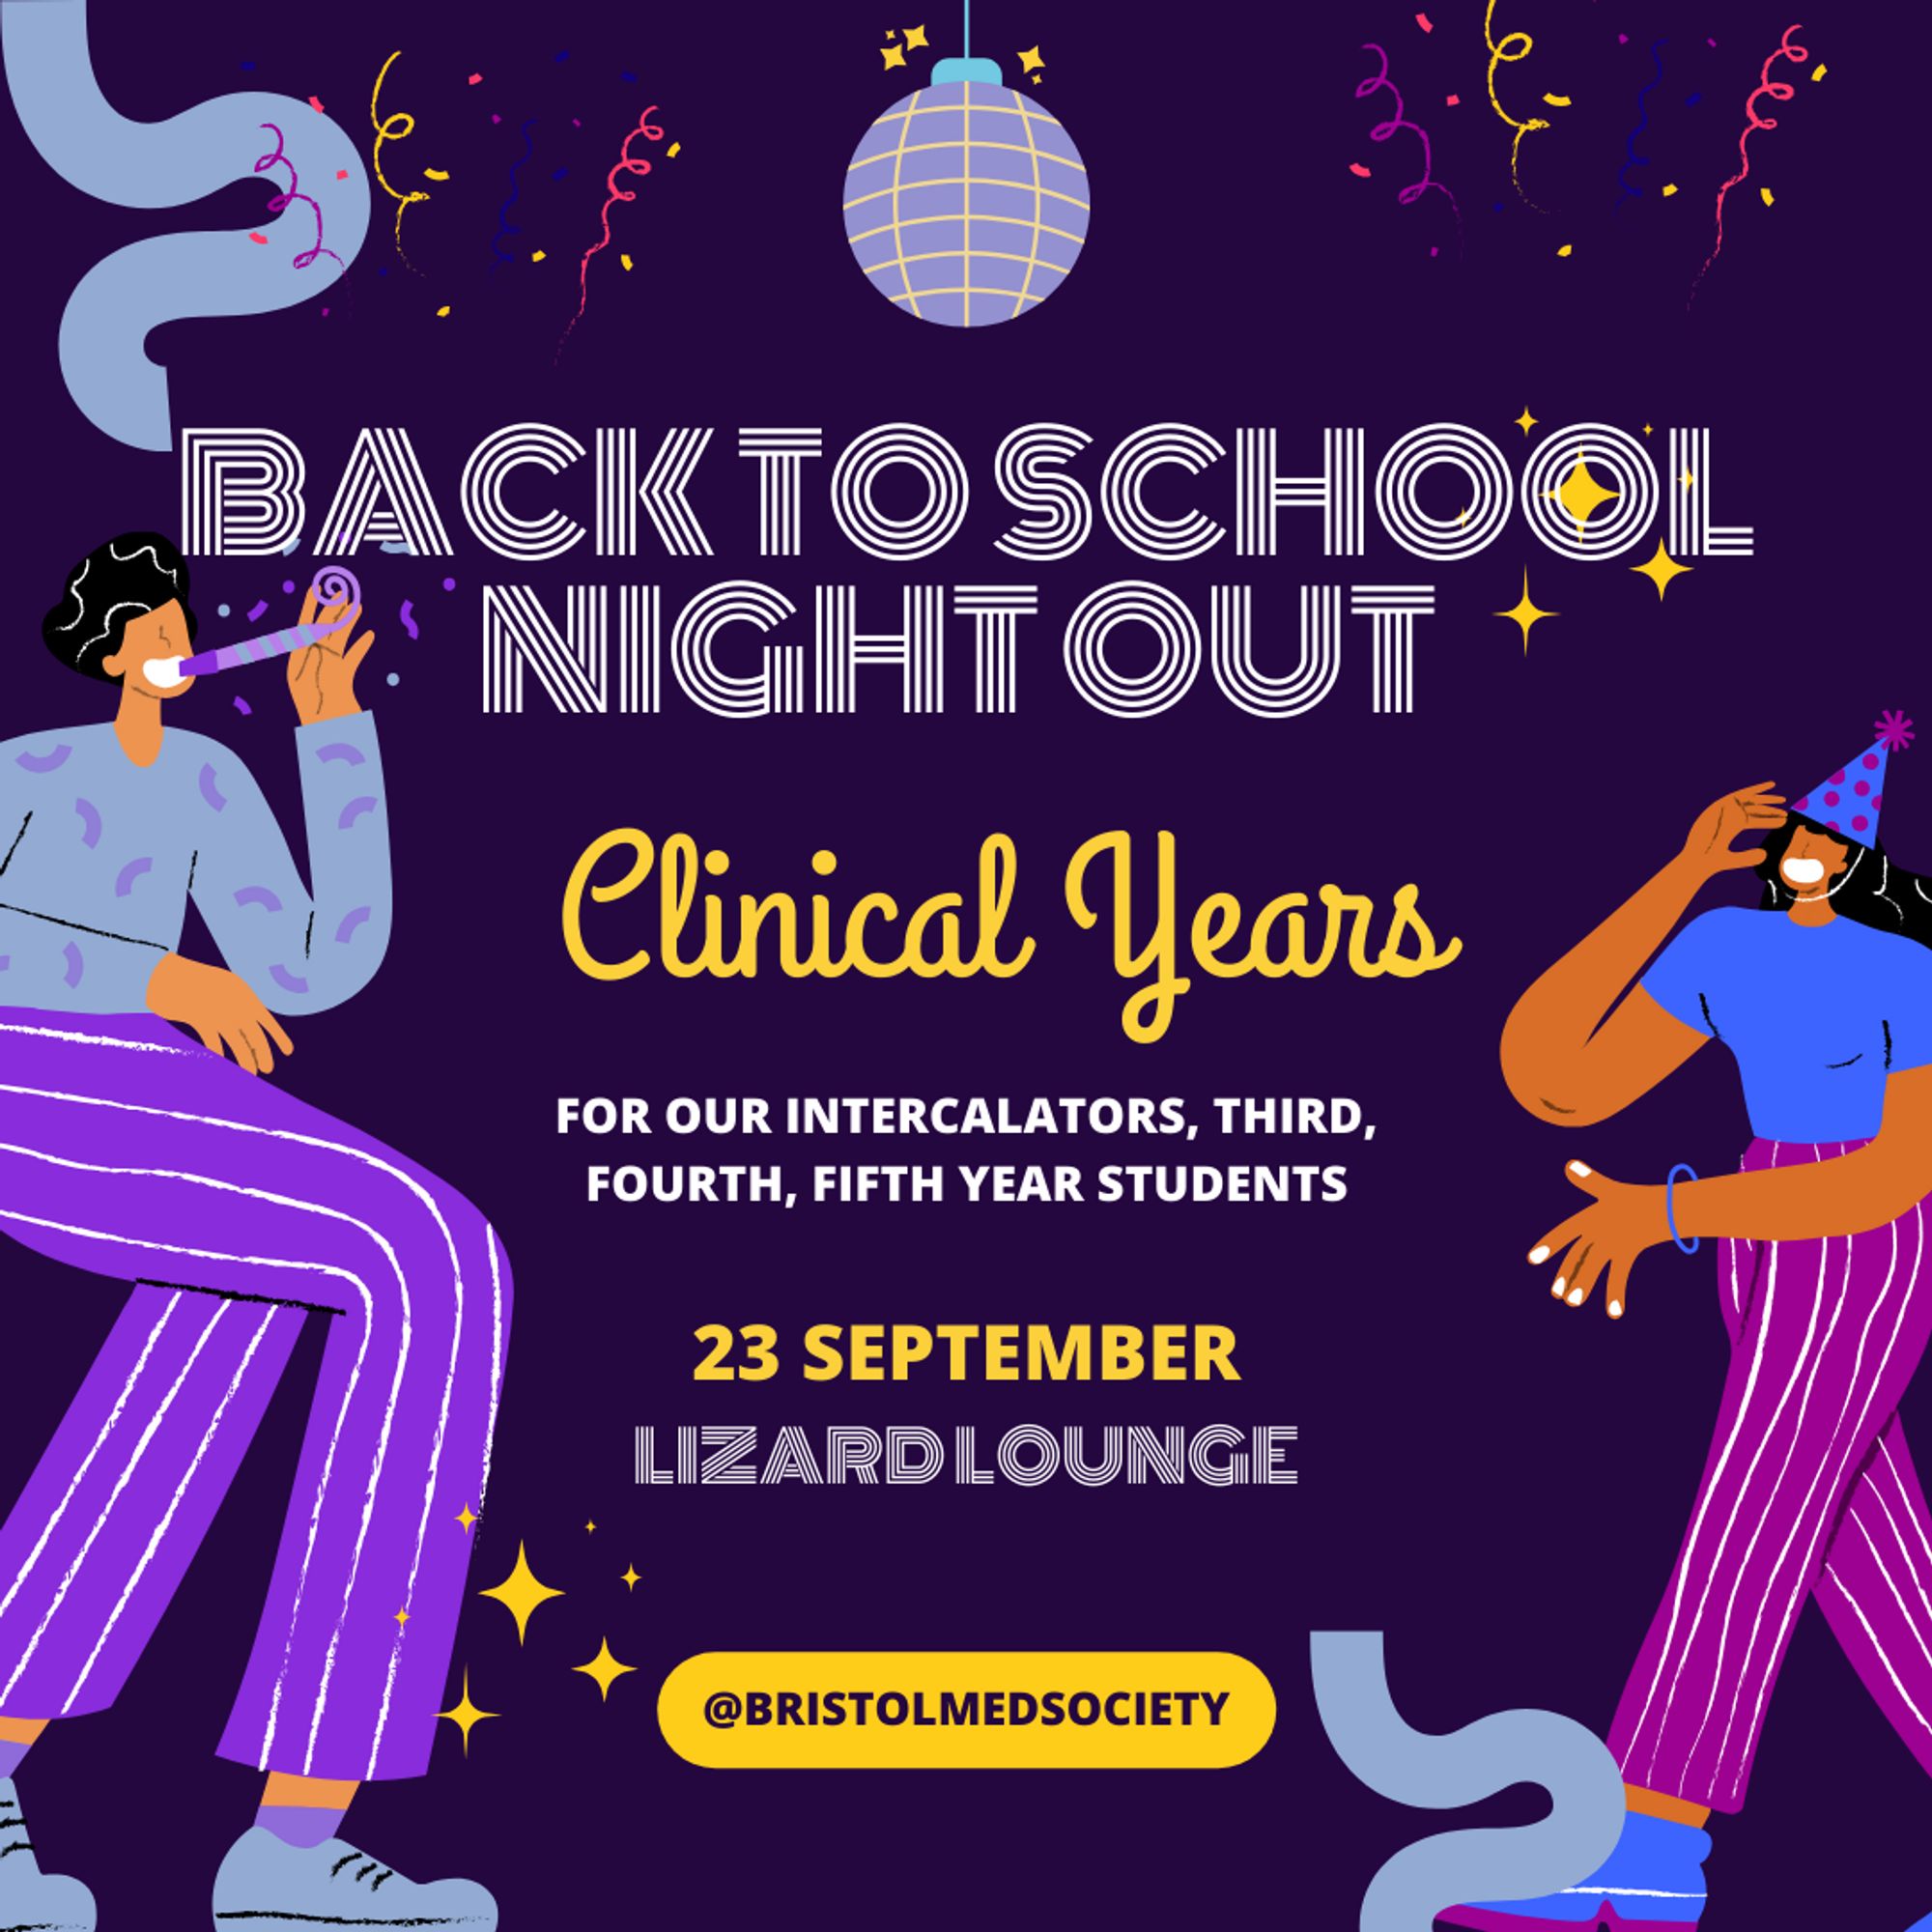 Clinical 'Back to School' Night Out